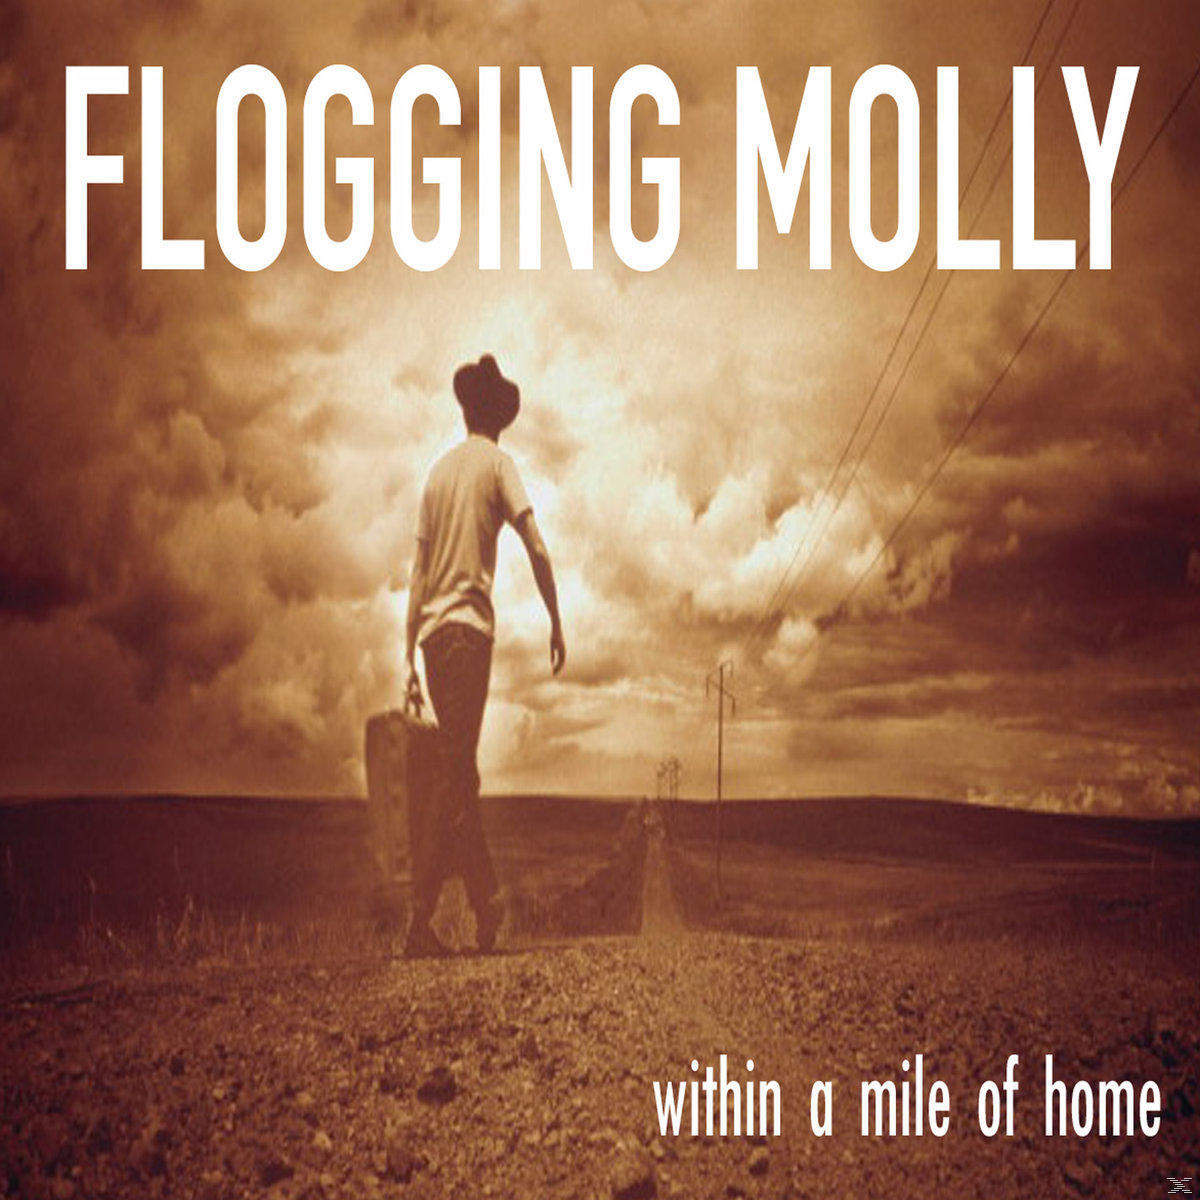 - Mile - Flogging (CD) Molly A Home Within Of